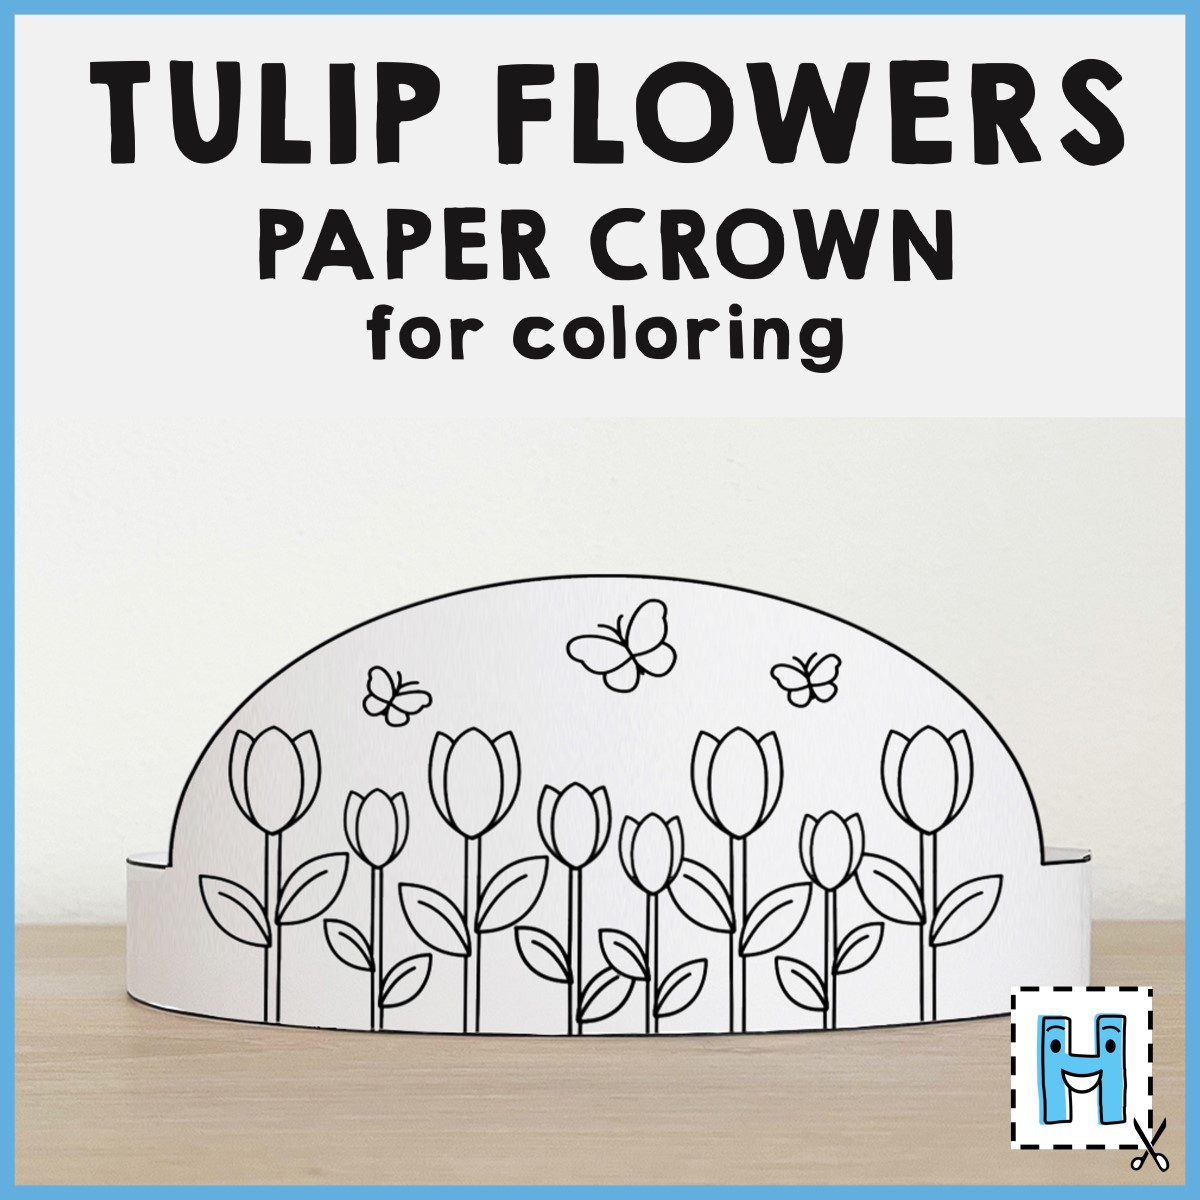 Tulip flowers paper crown headband printable coloring easter spring craft activity made by teachers